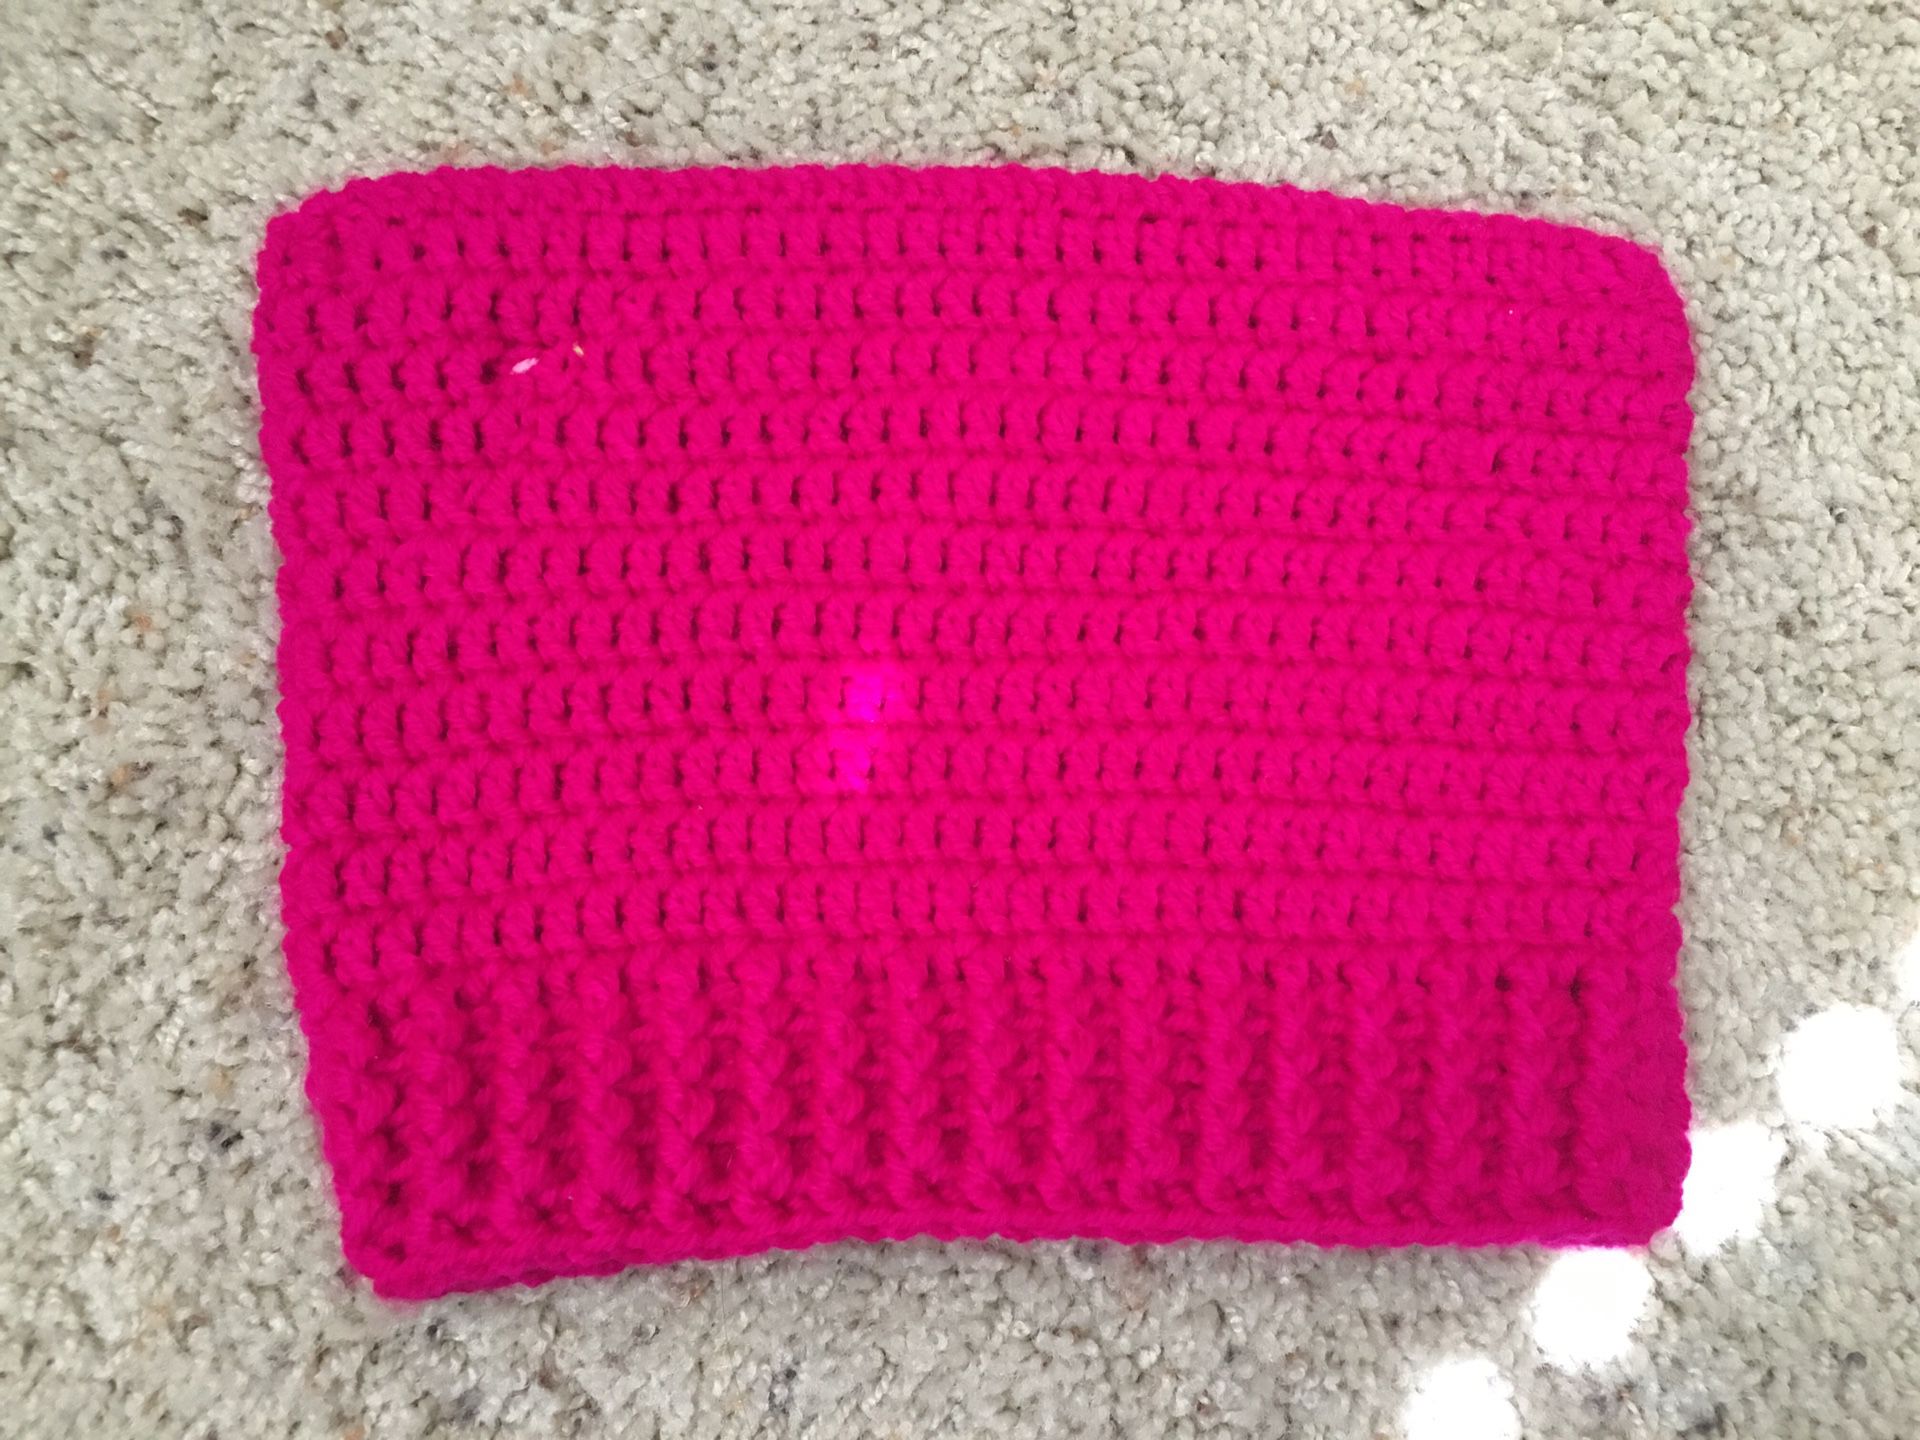 Knit or crocheted beanie hat